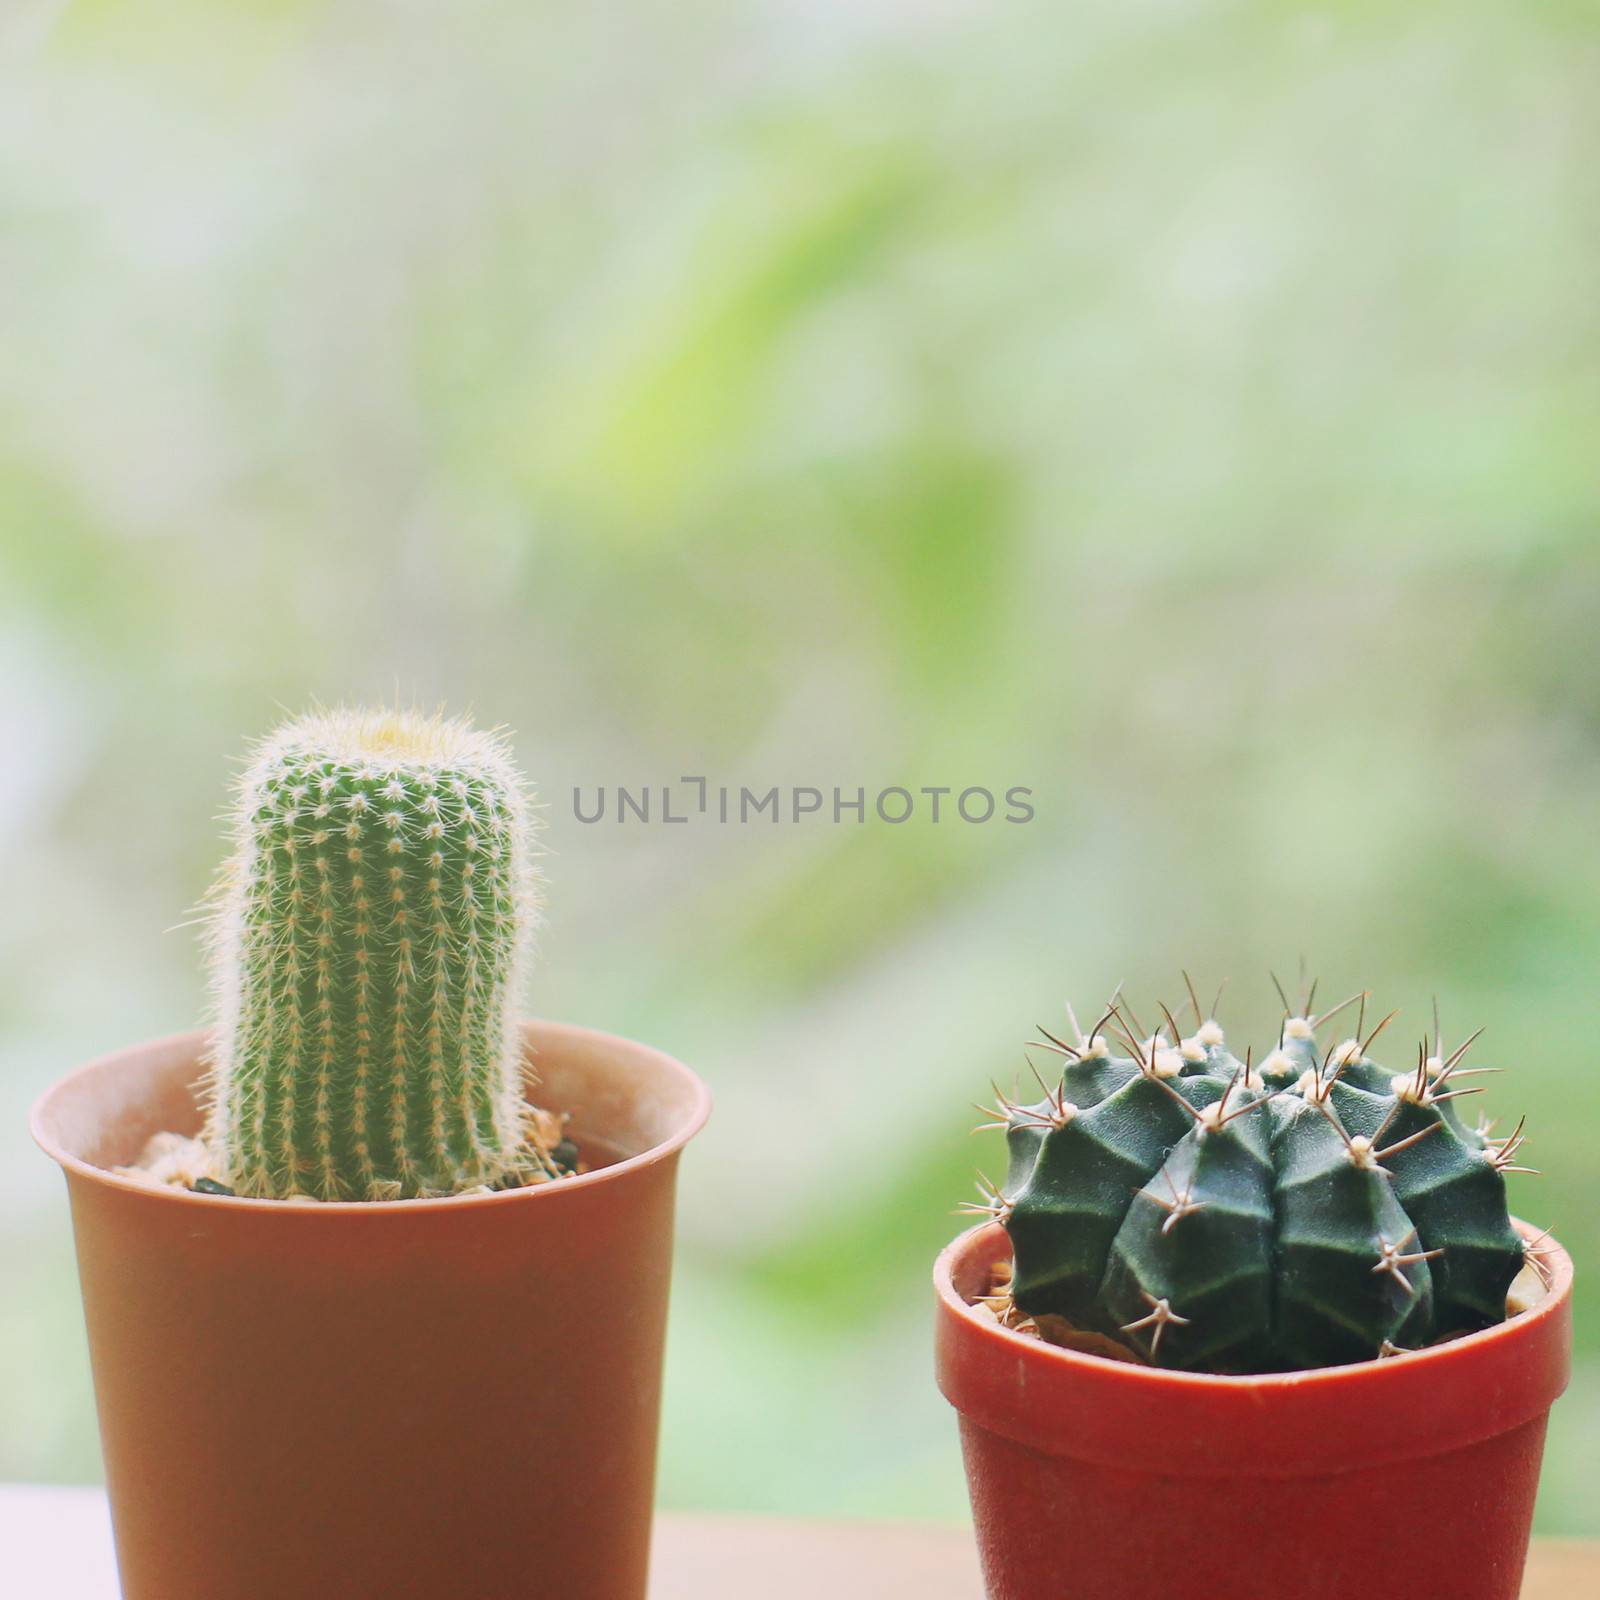 Small cactus for decorated with retro filter effect by nuchylee